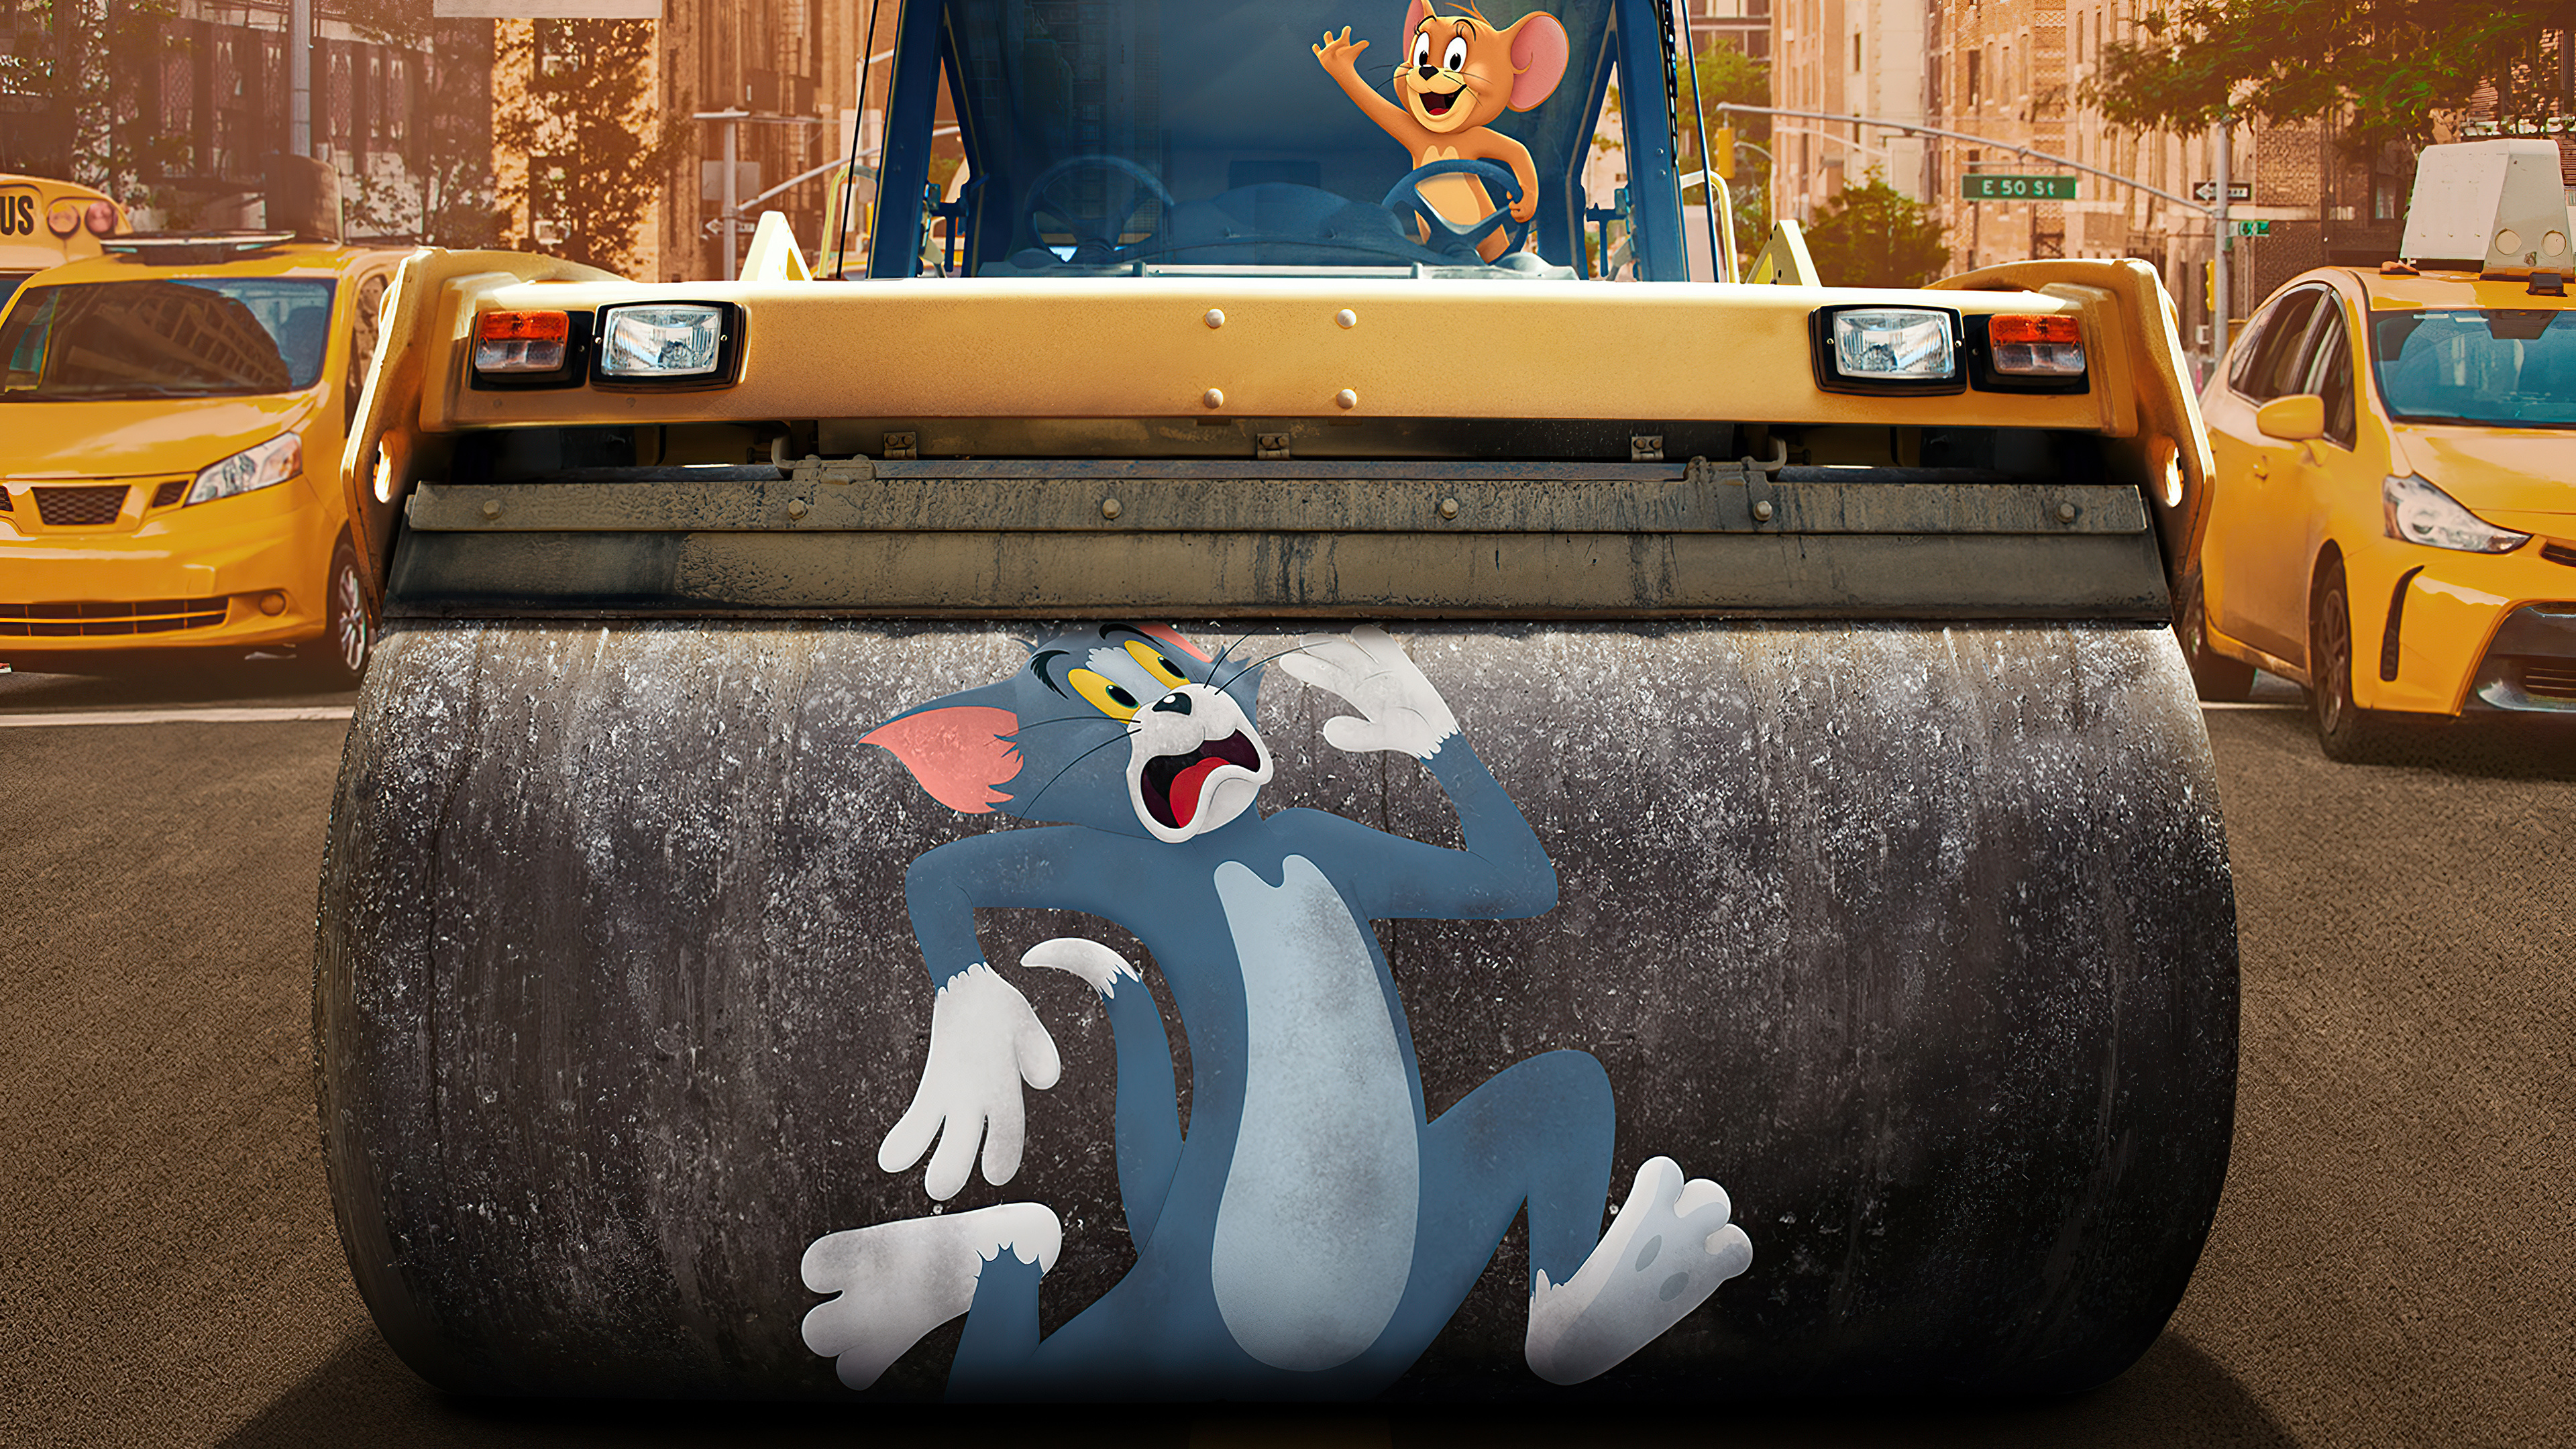 2021 Tom and Jerry, HD movies, Vibrant colors, Unforgettable journey, 3840x2160 4K Desktop